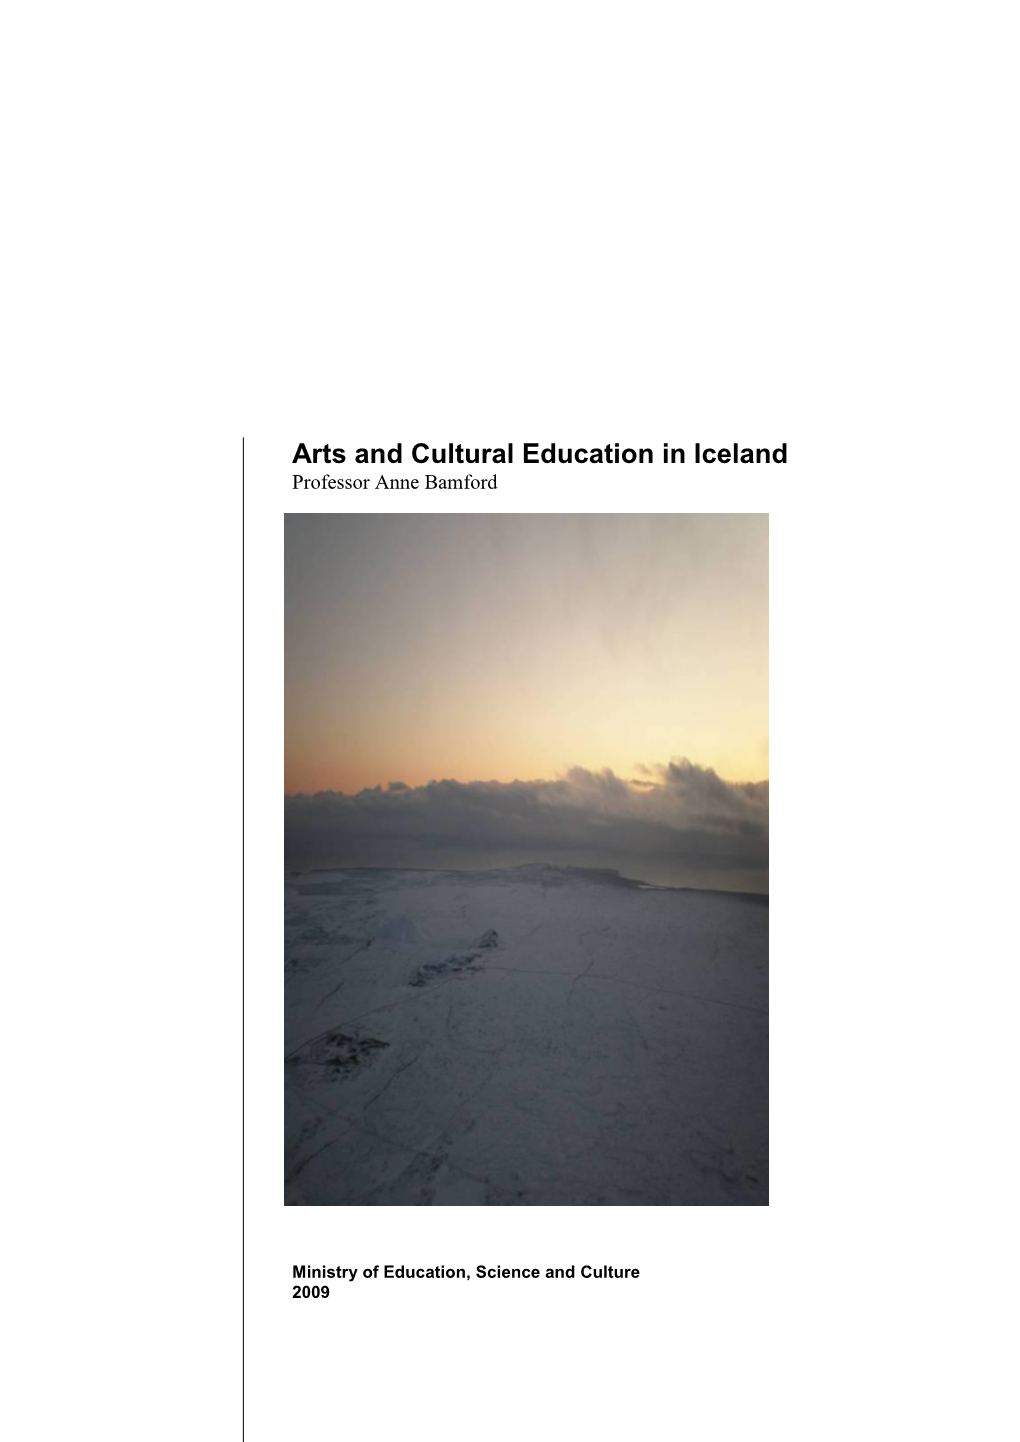 Arts and Cultural Education in Iceland Professor Anne Bamford